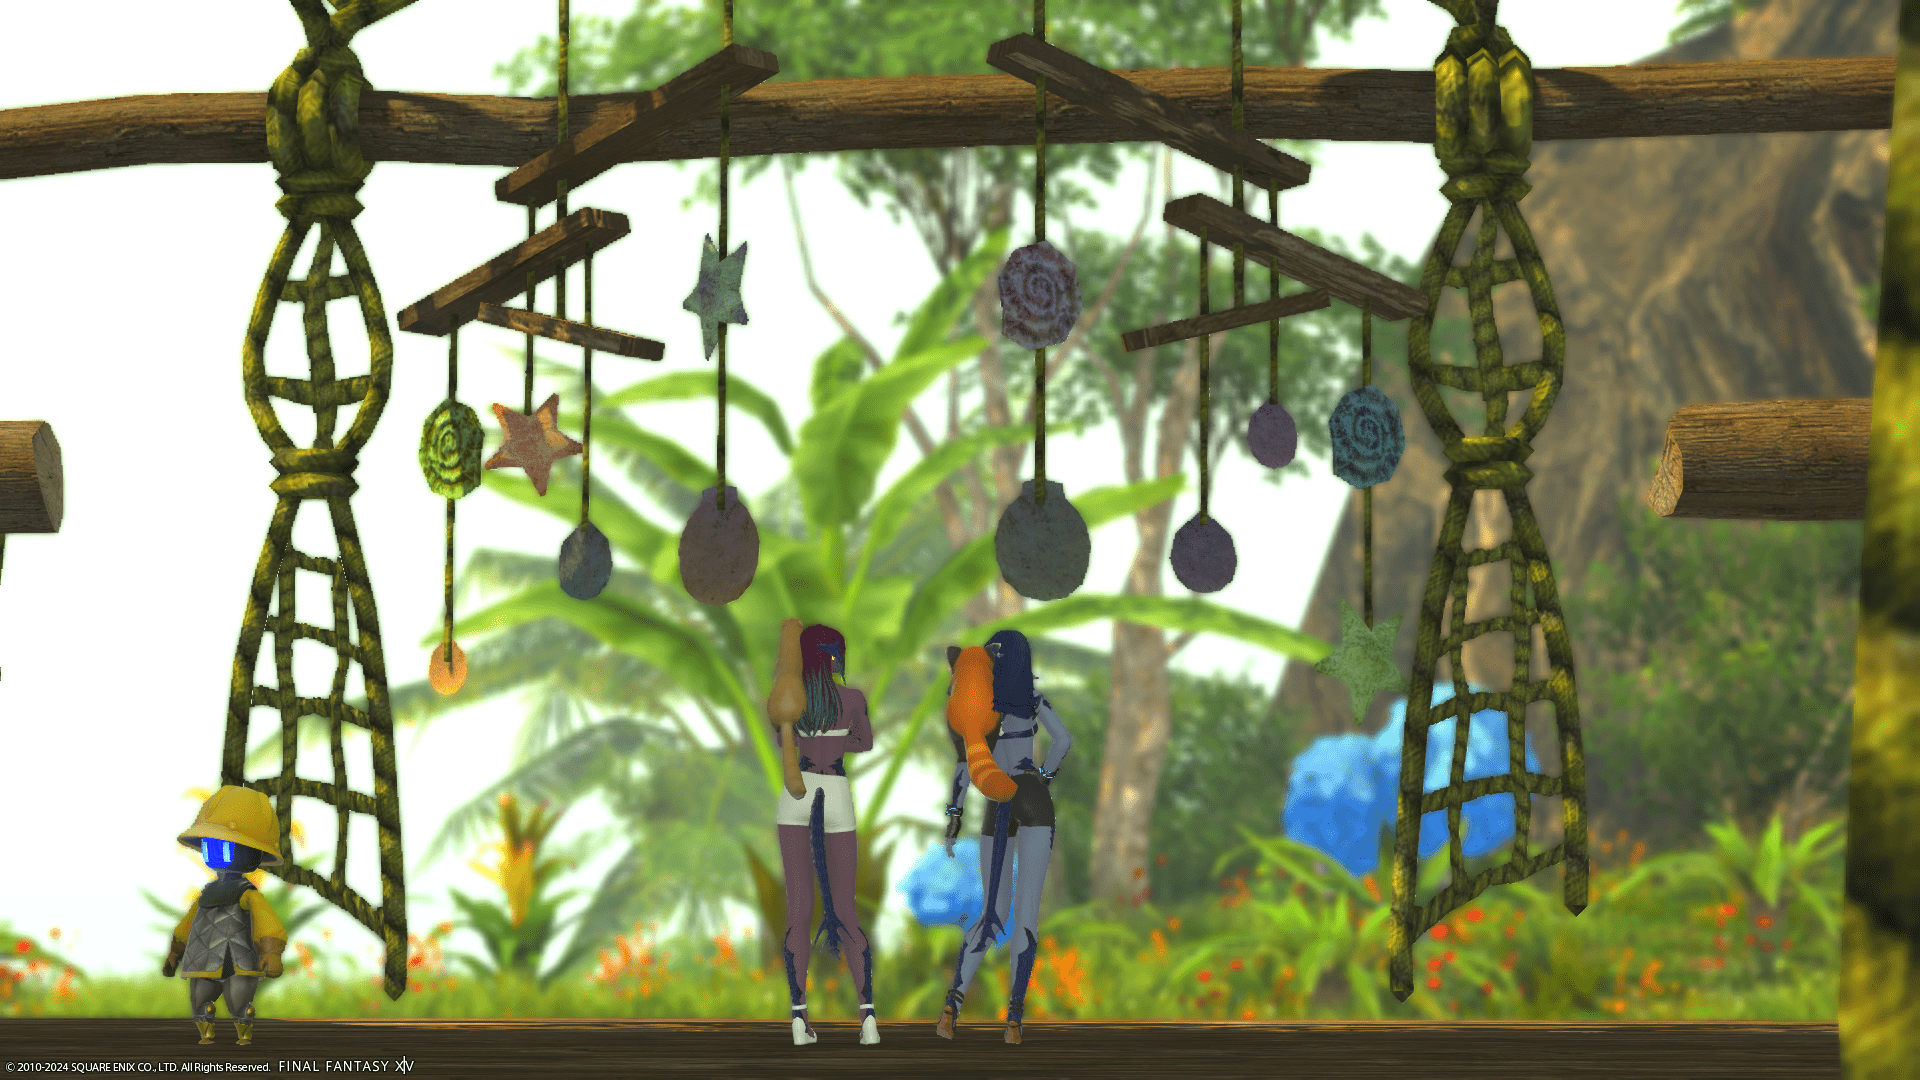 Lizicus & Laureine under a wooden tropical shelter with nets and seashells hanging above them.